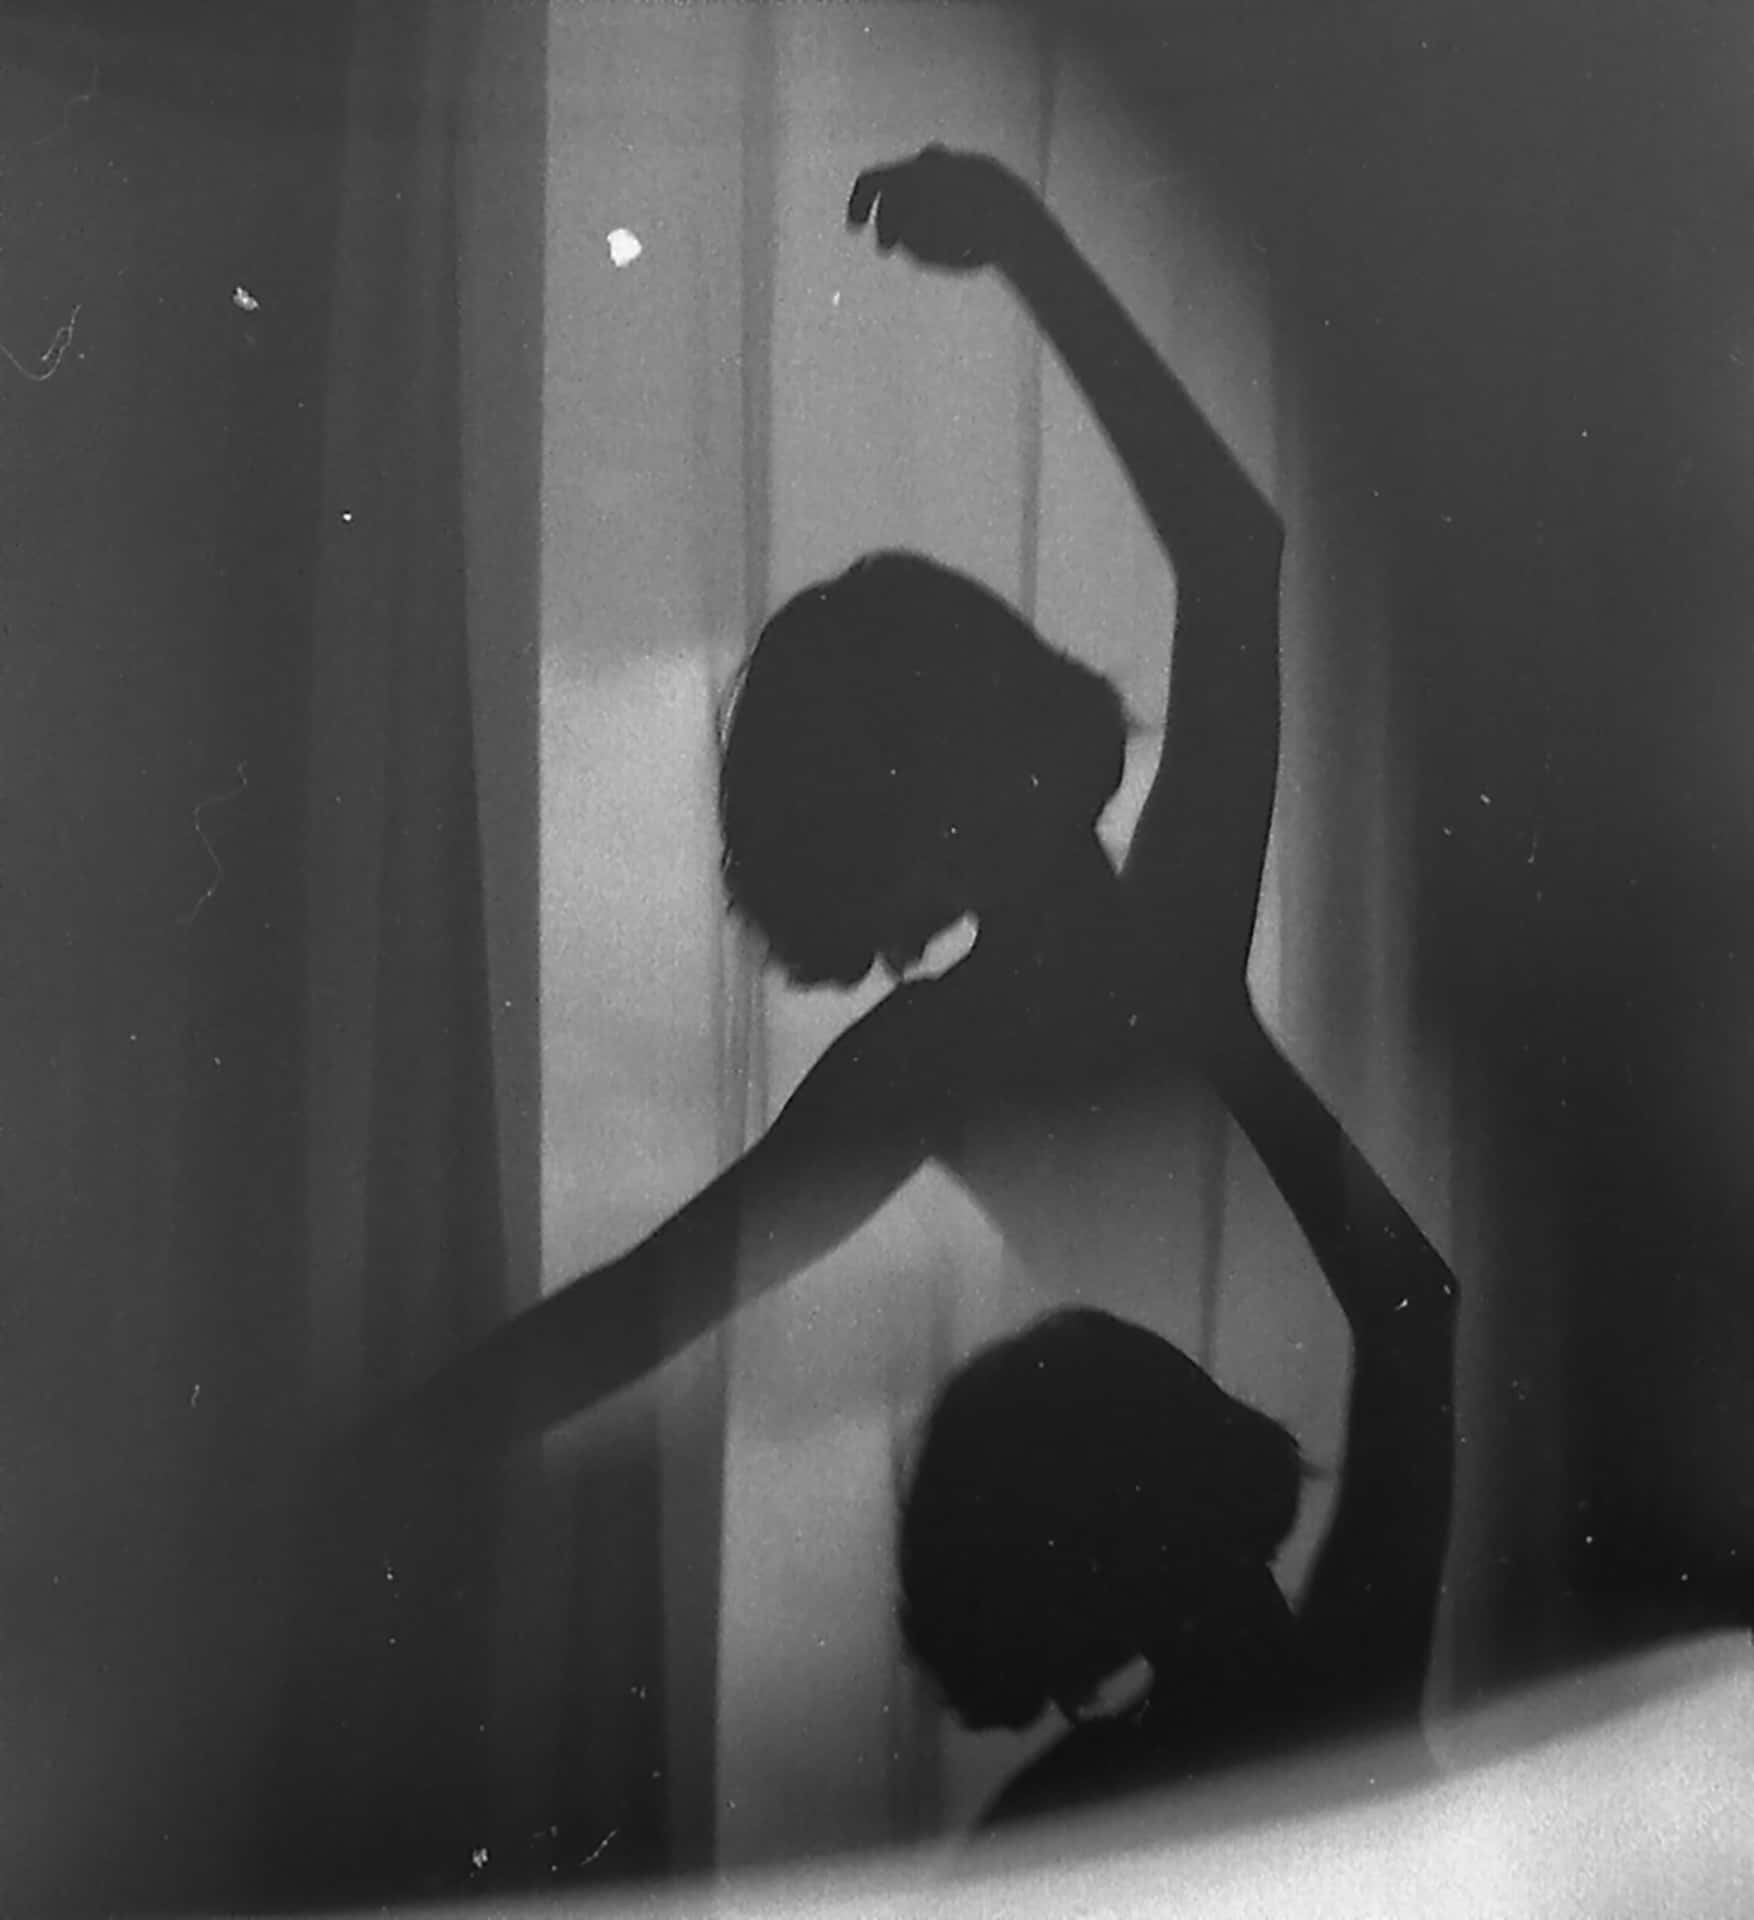 a silhouette of a woman dancing in front of a window